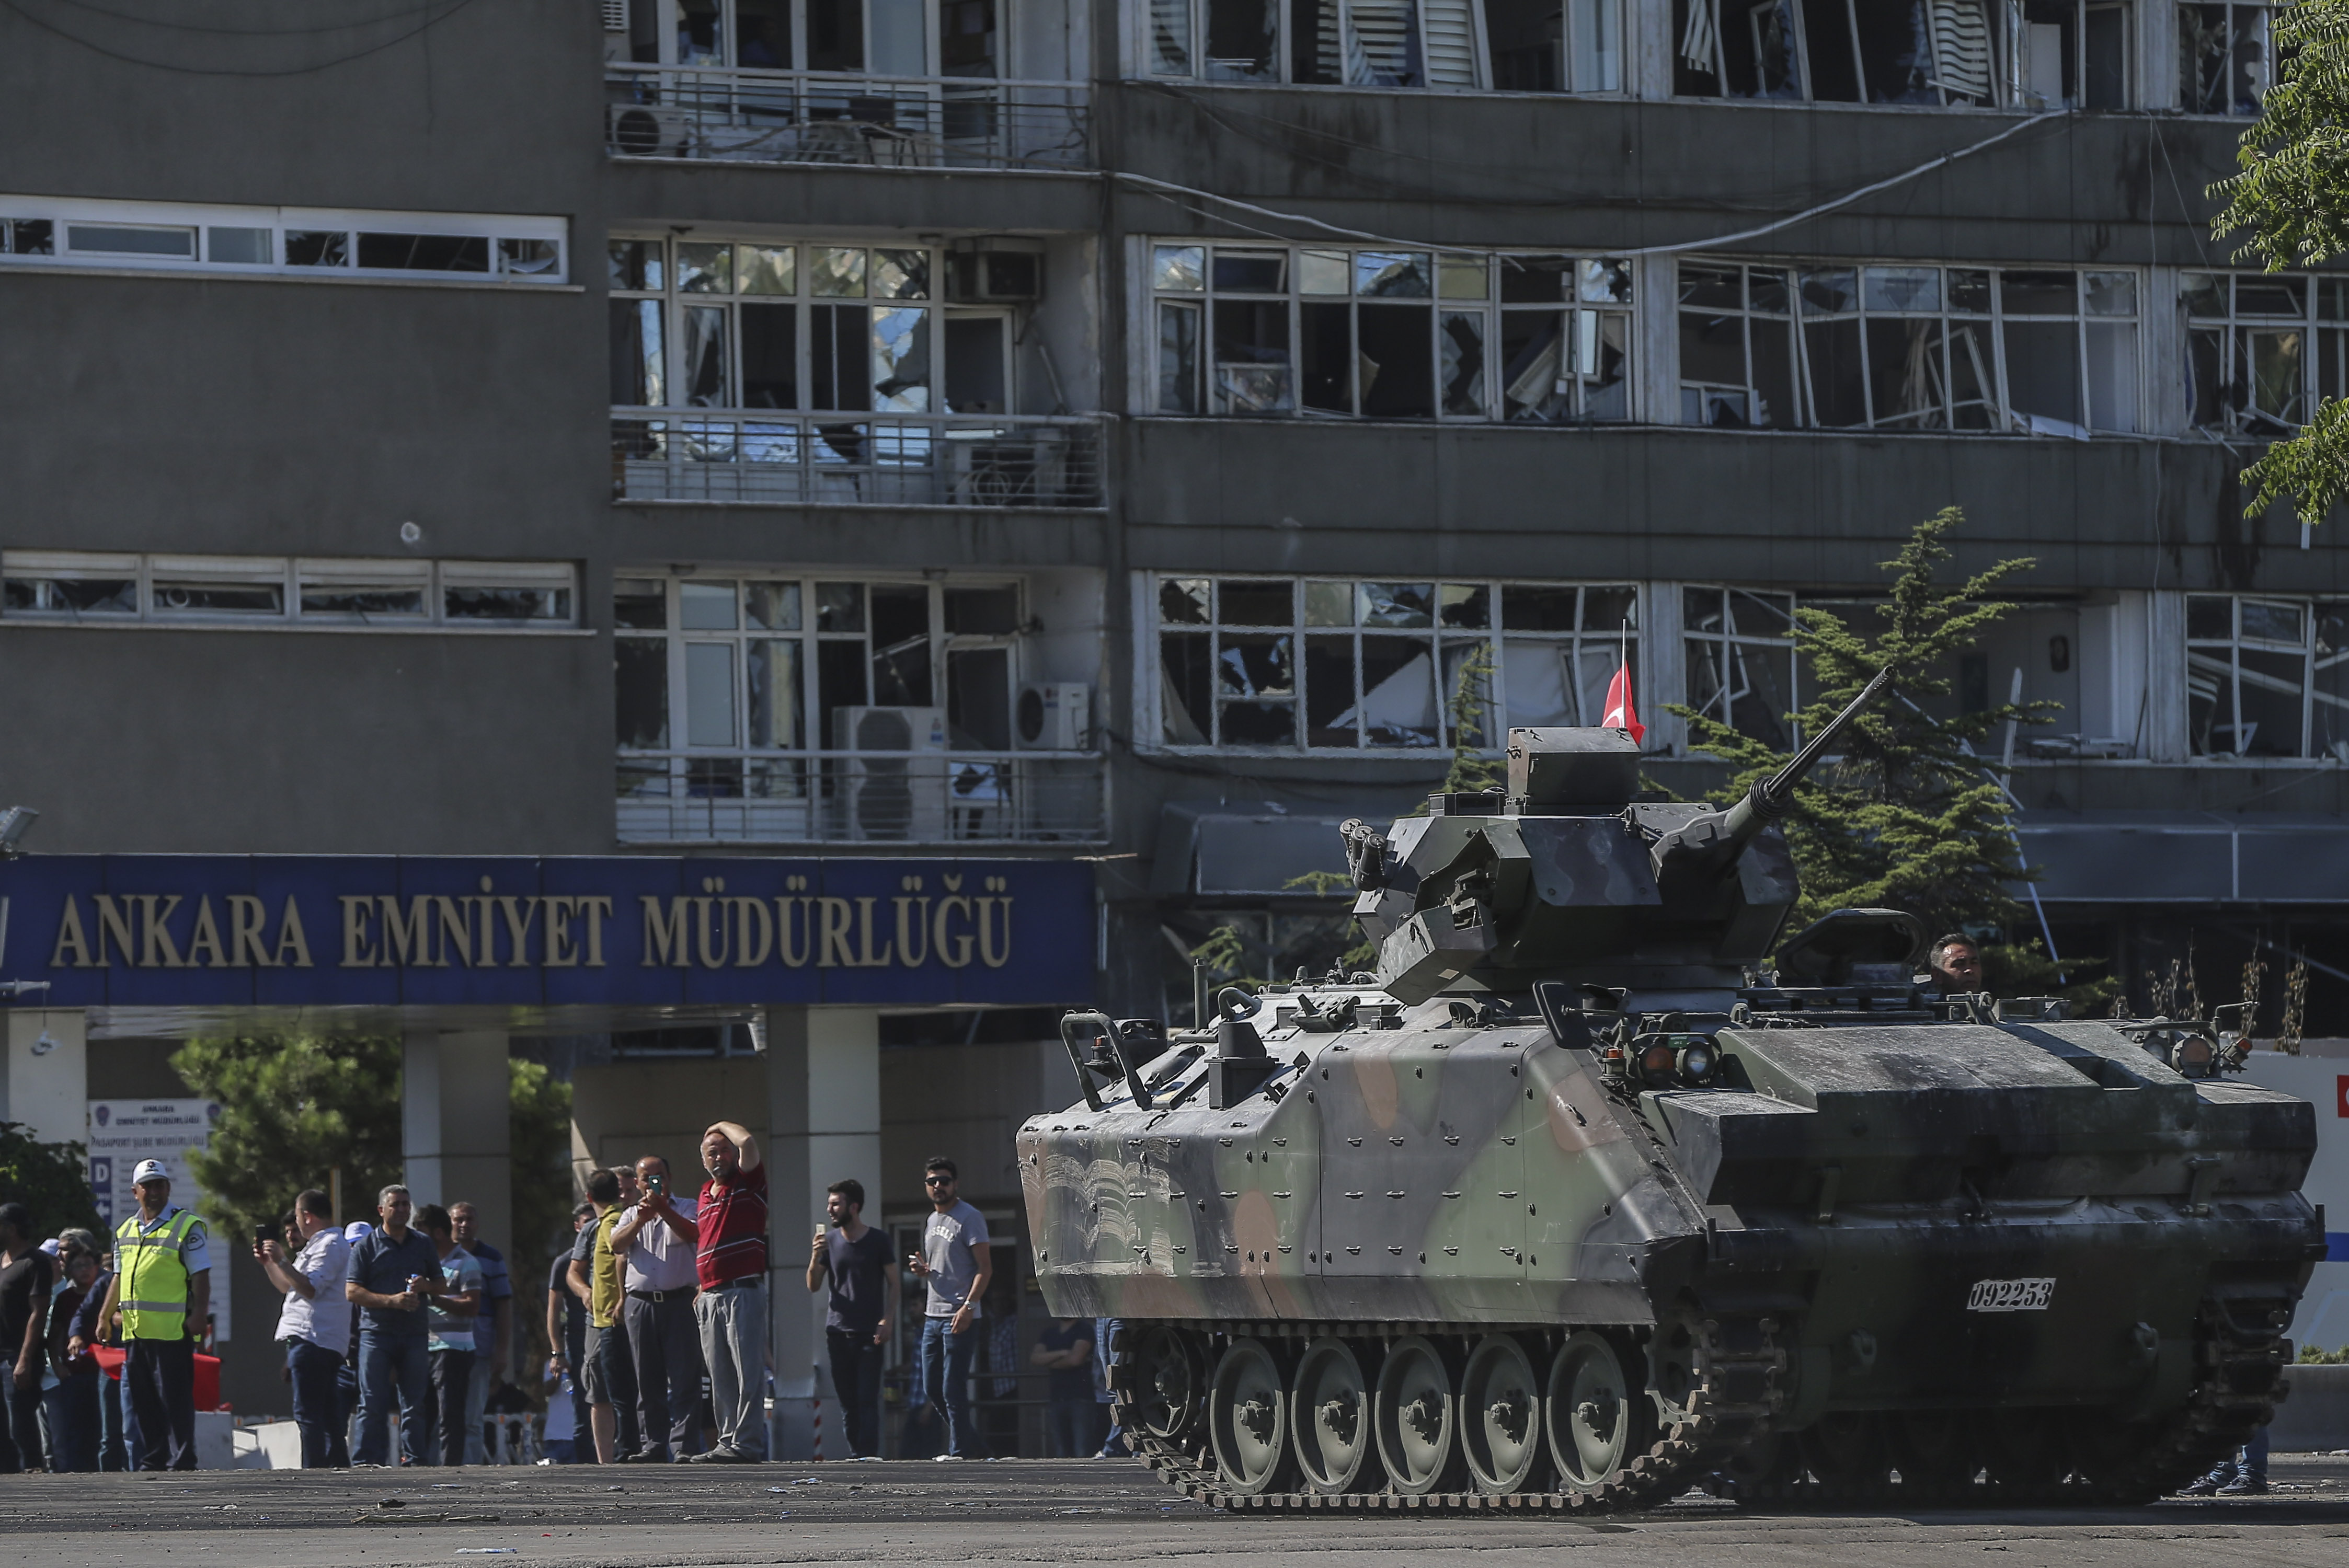 After the resistance, which continued until 5:13 a.m., six tanks under the control of coup soldiers were seized and the soldiers were taken into custody.